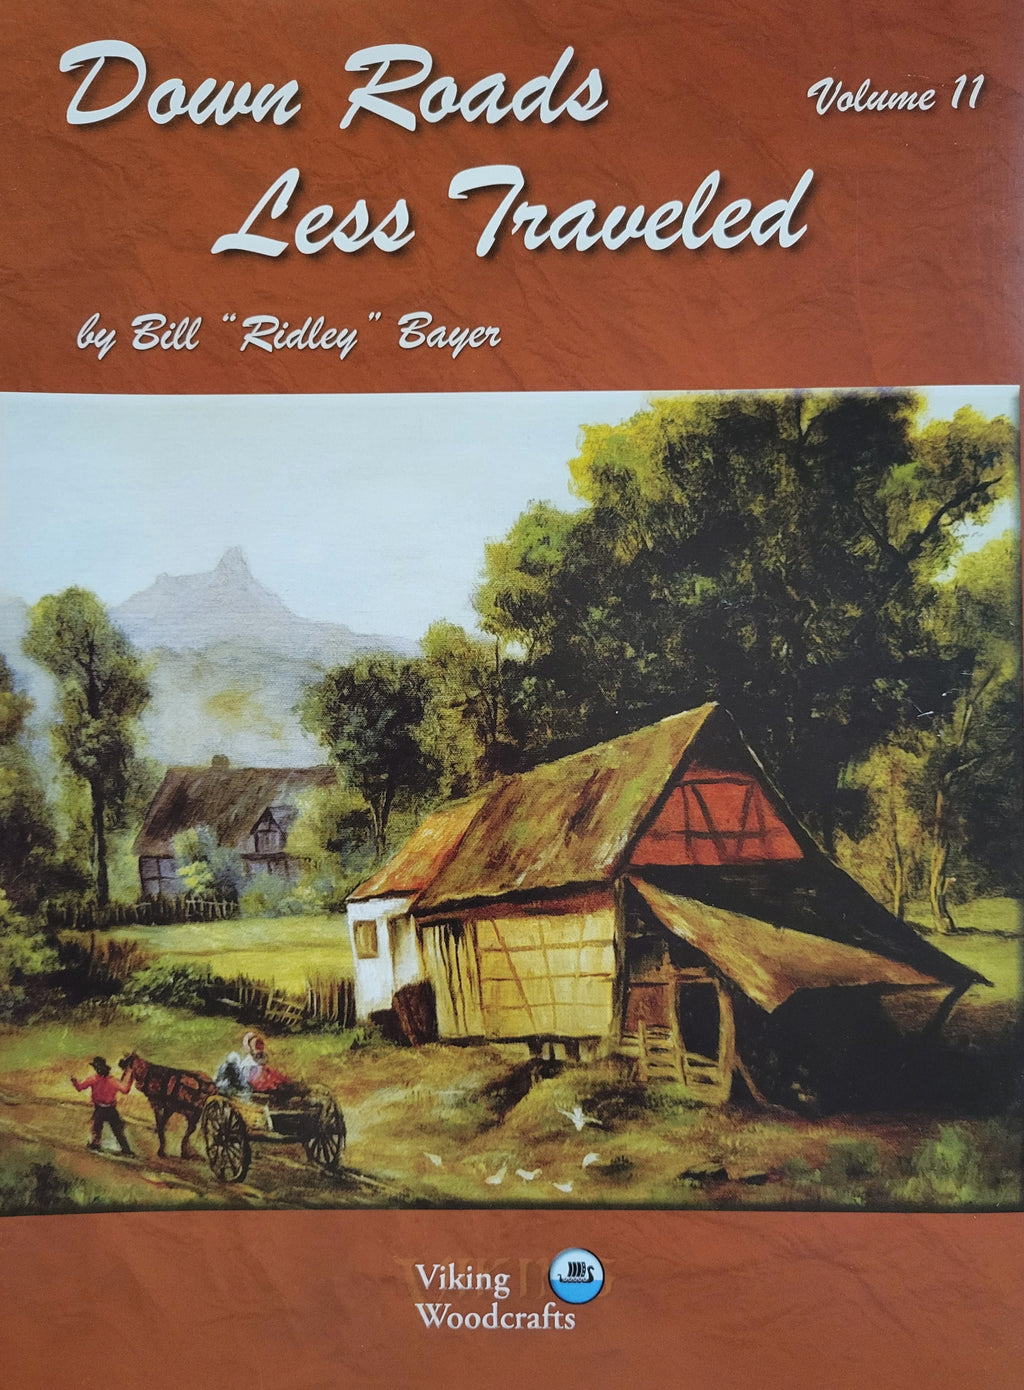 Down Roads Less Traveled Volume 11 by Bill Bayer